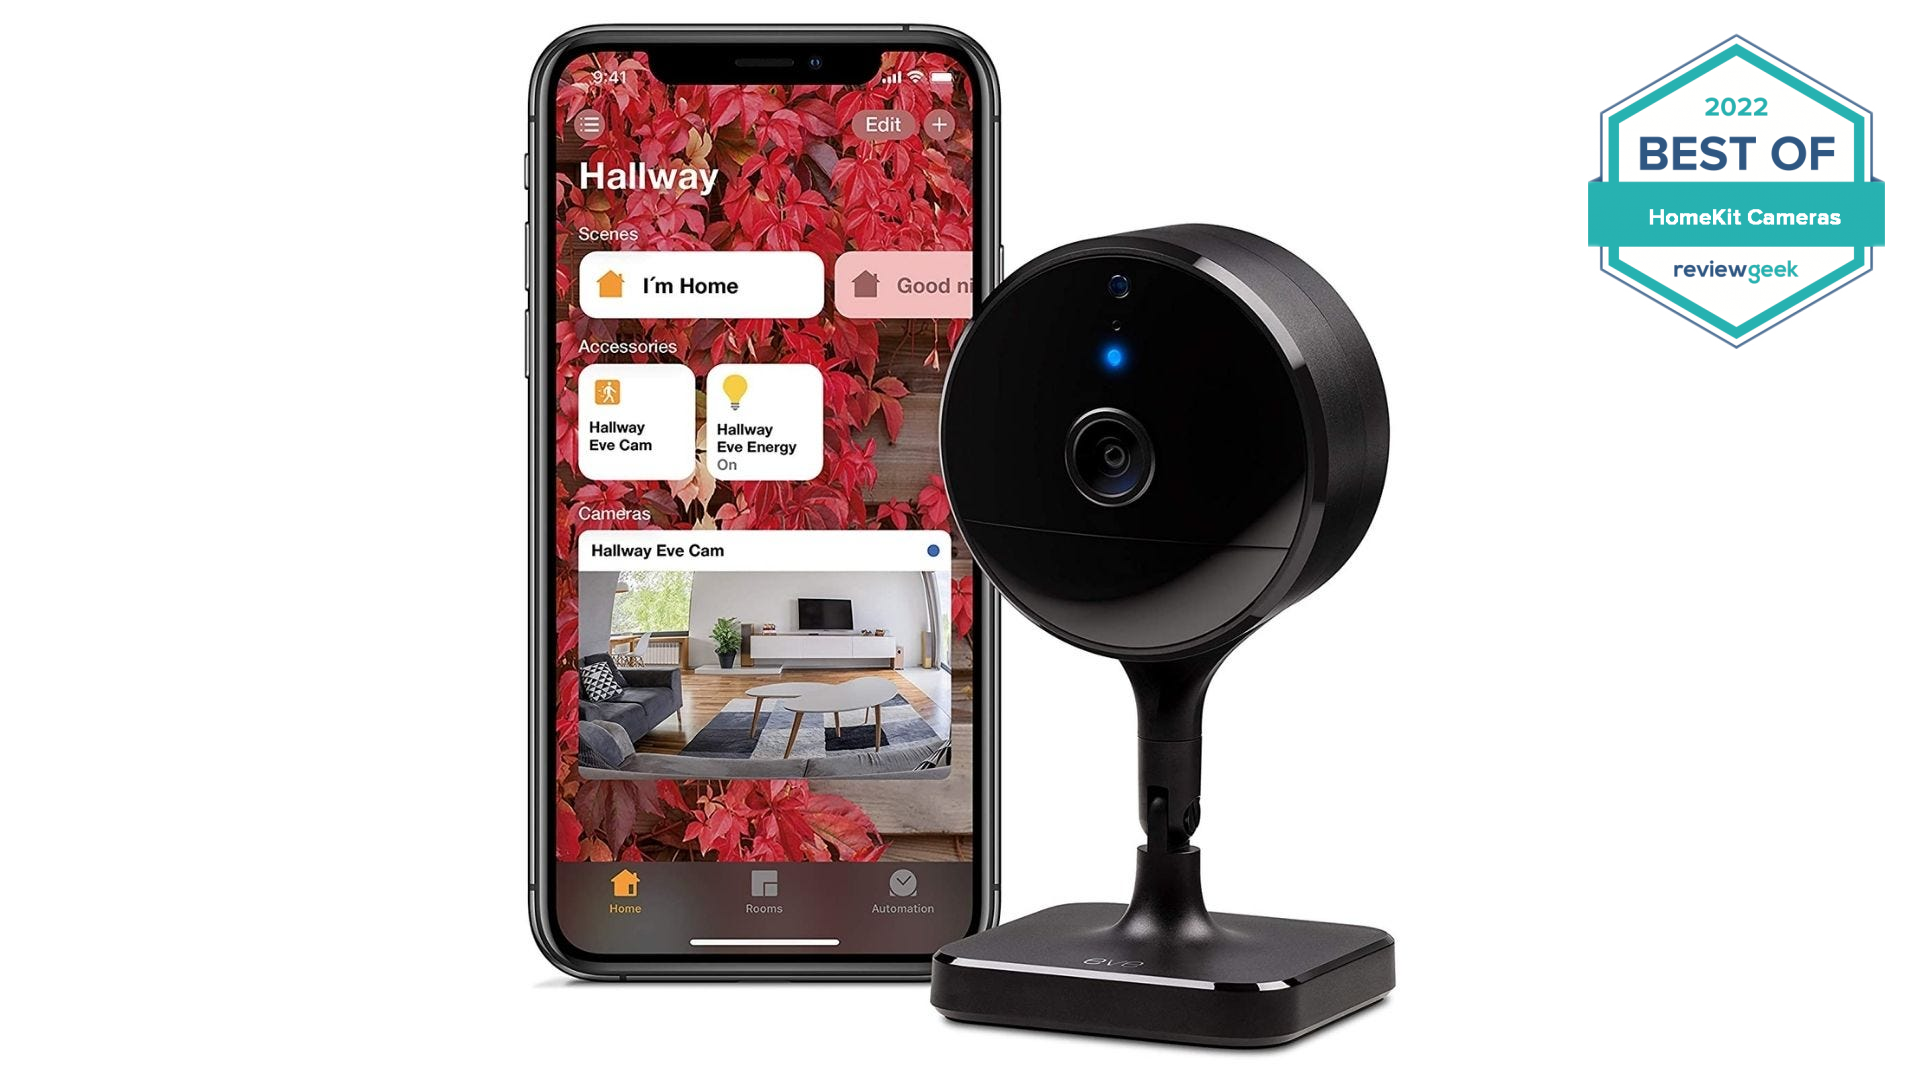 Eve Cam Smart Home Indoor Camera that works with Apple HomeKit, next to a smartphone